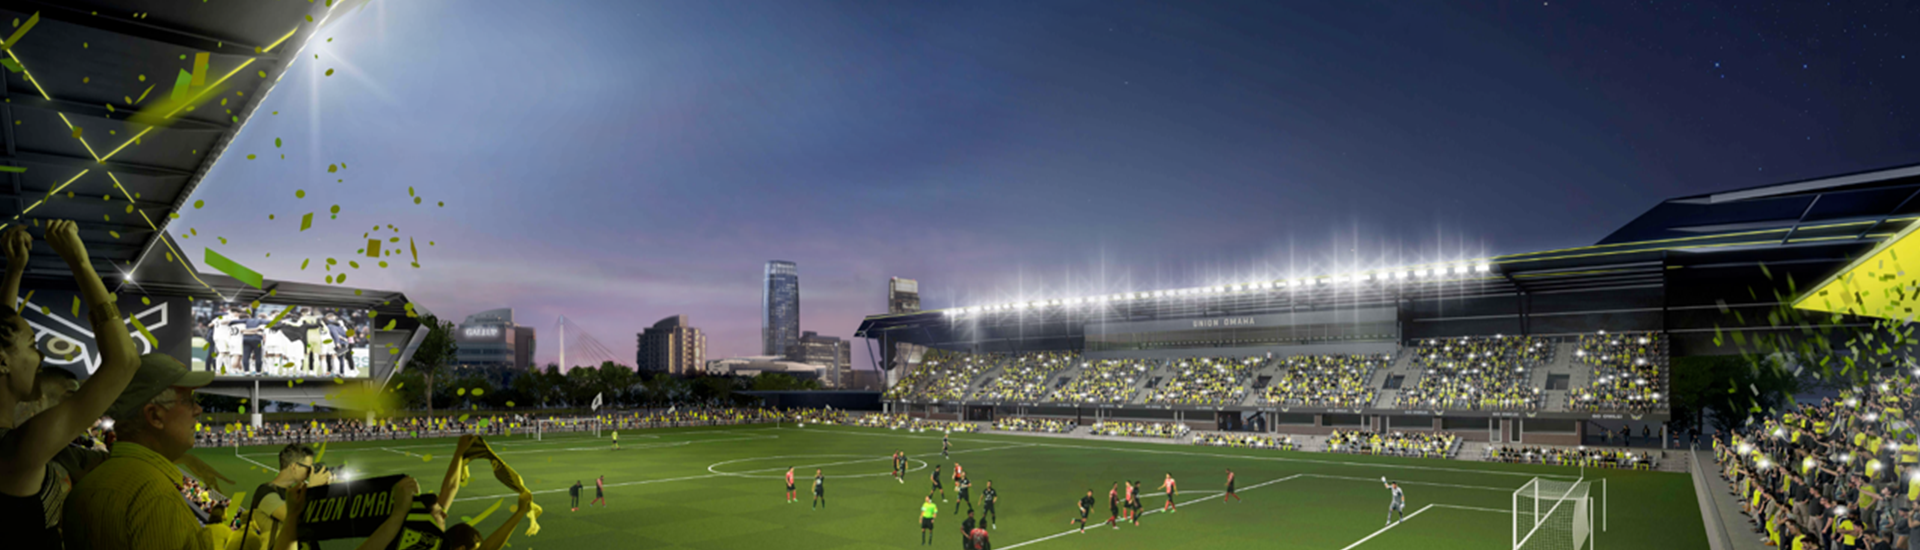 A view inside Union Omaha's proposed new stadium, showing sections of fans cheering with the downtown Omaha skyline in the background.